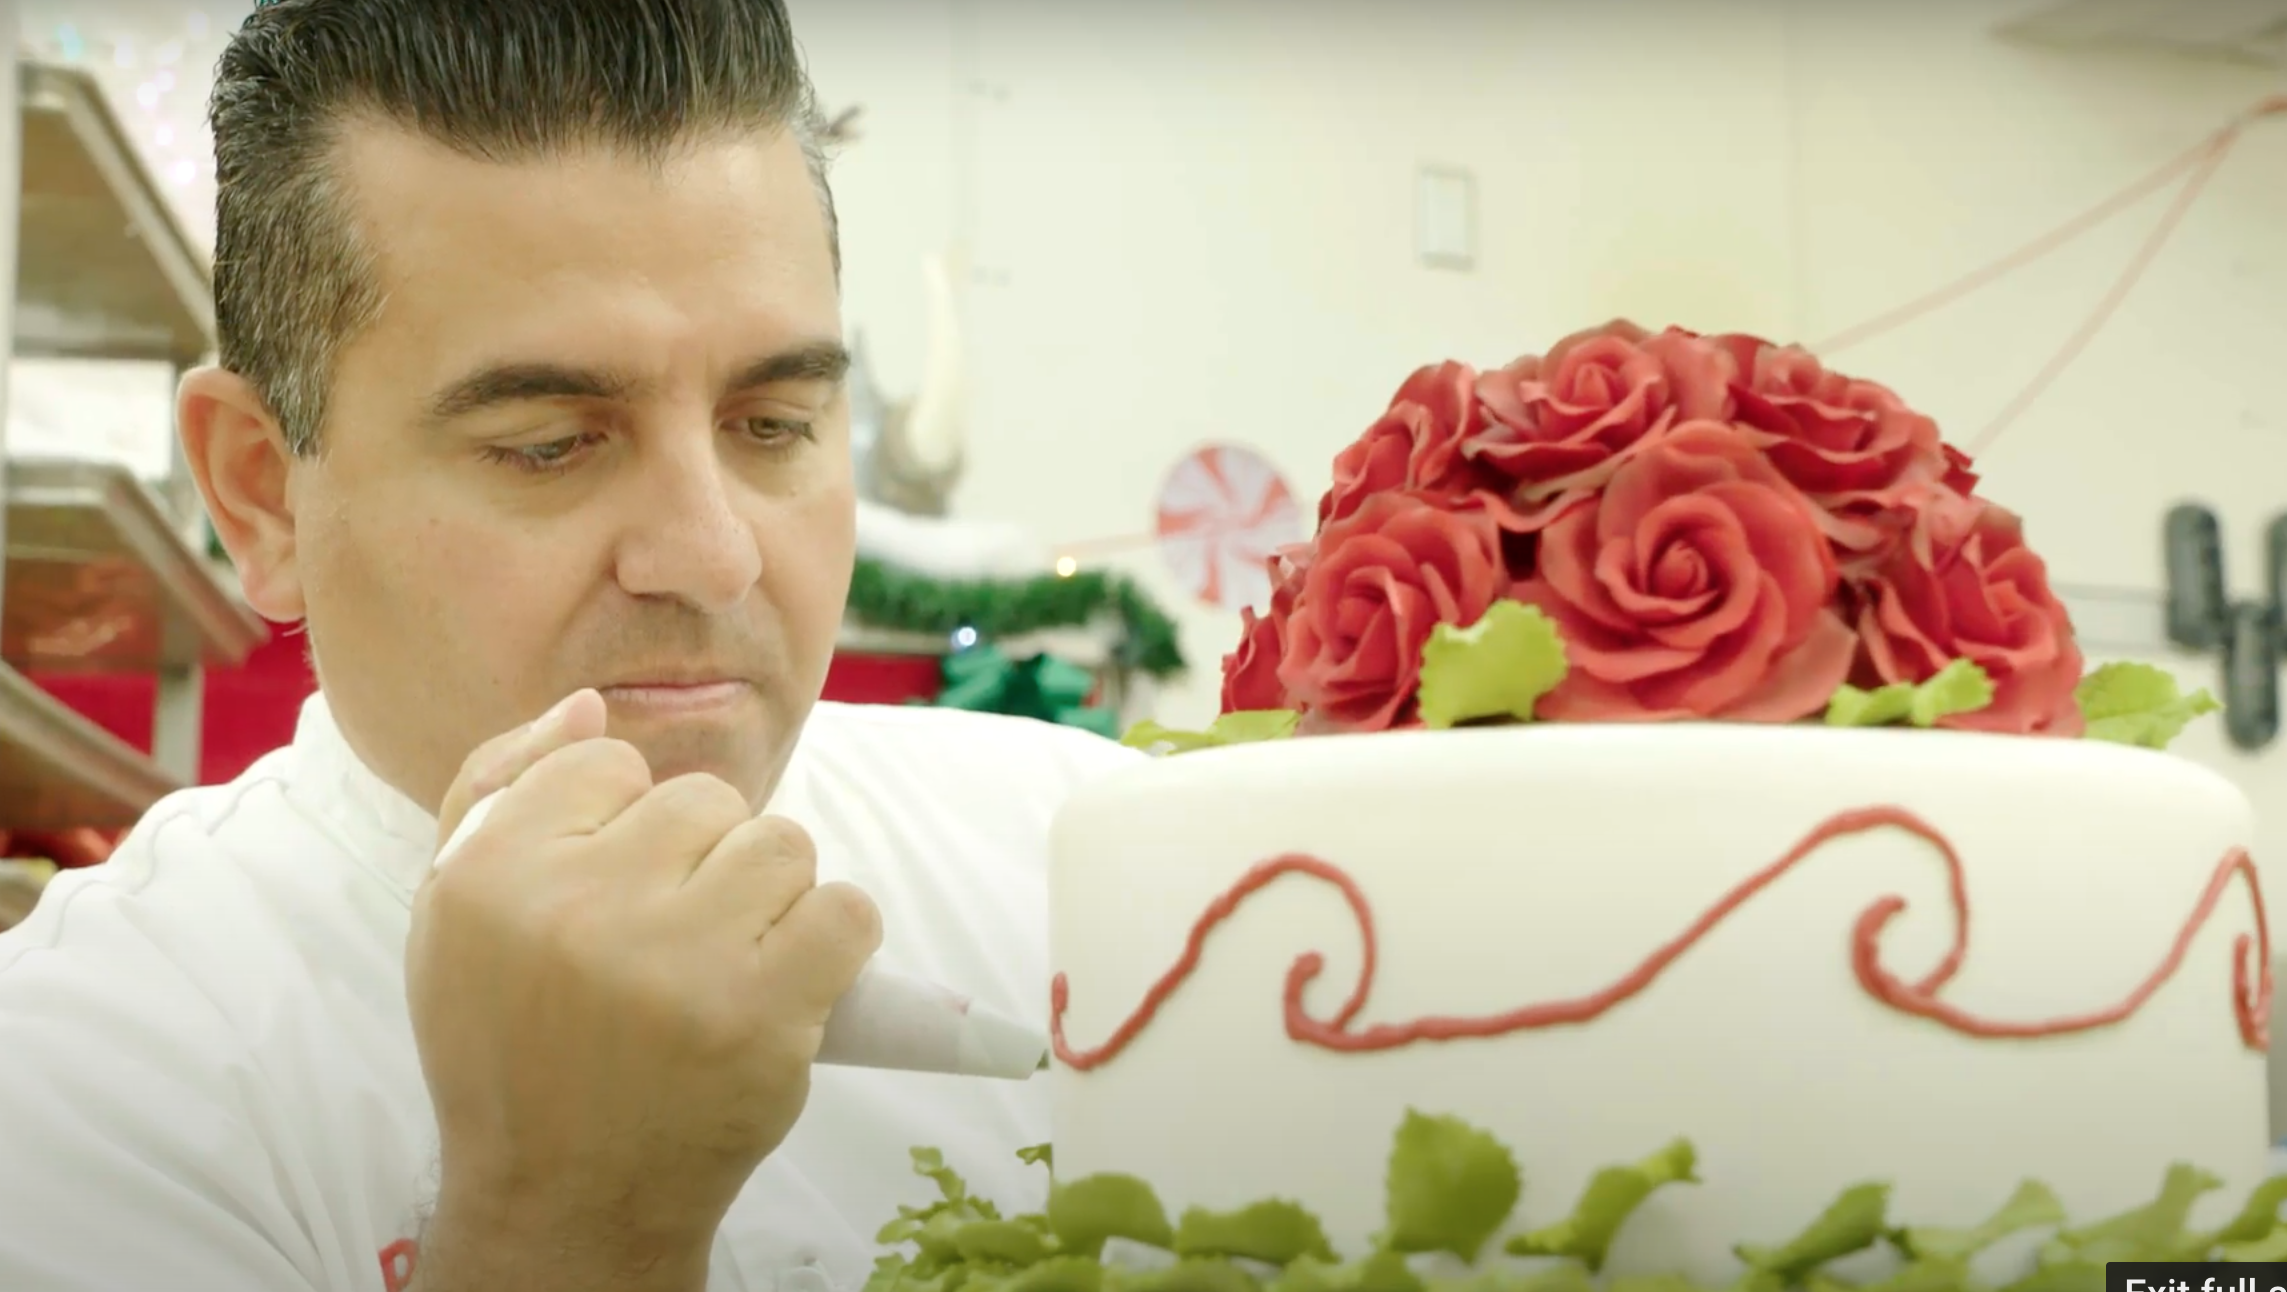 New Jersey's 'Cake Boss' is coming back to TV